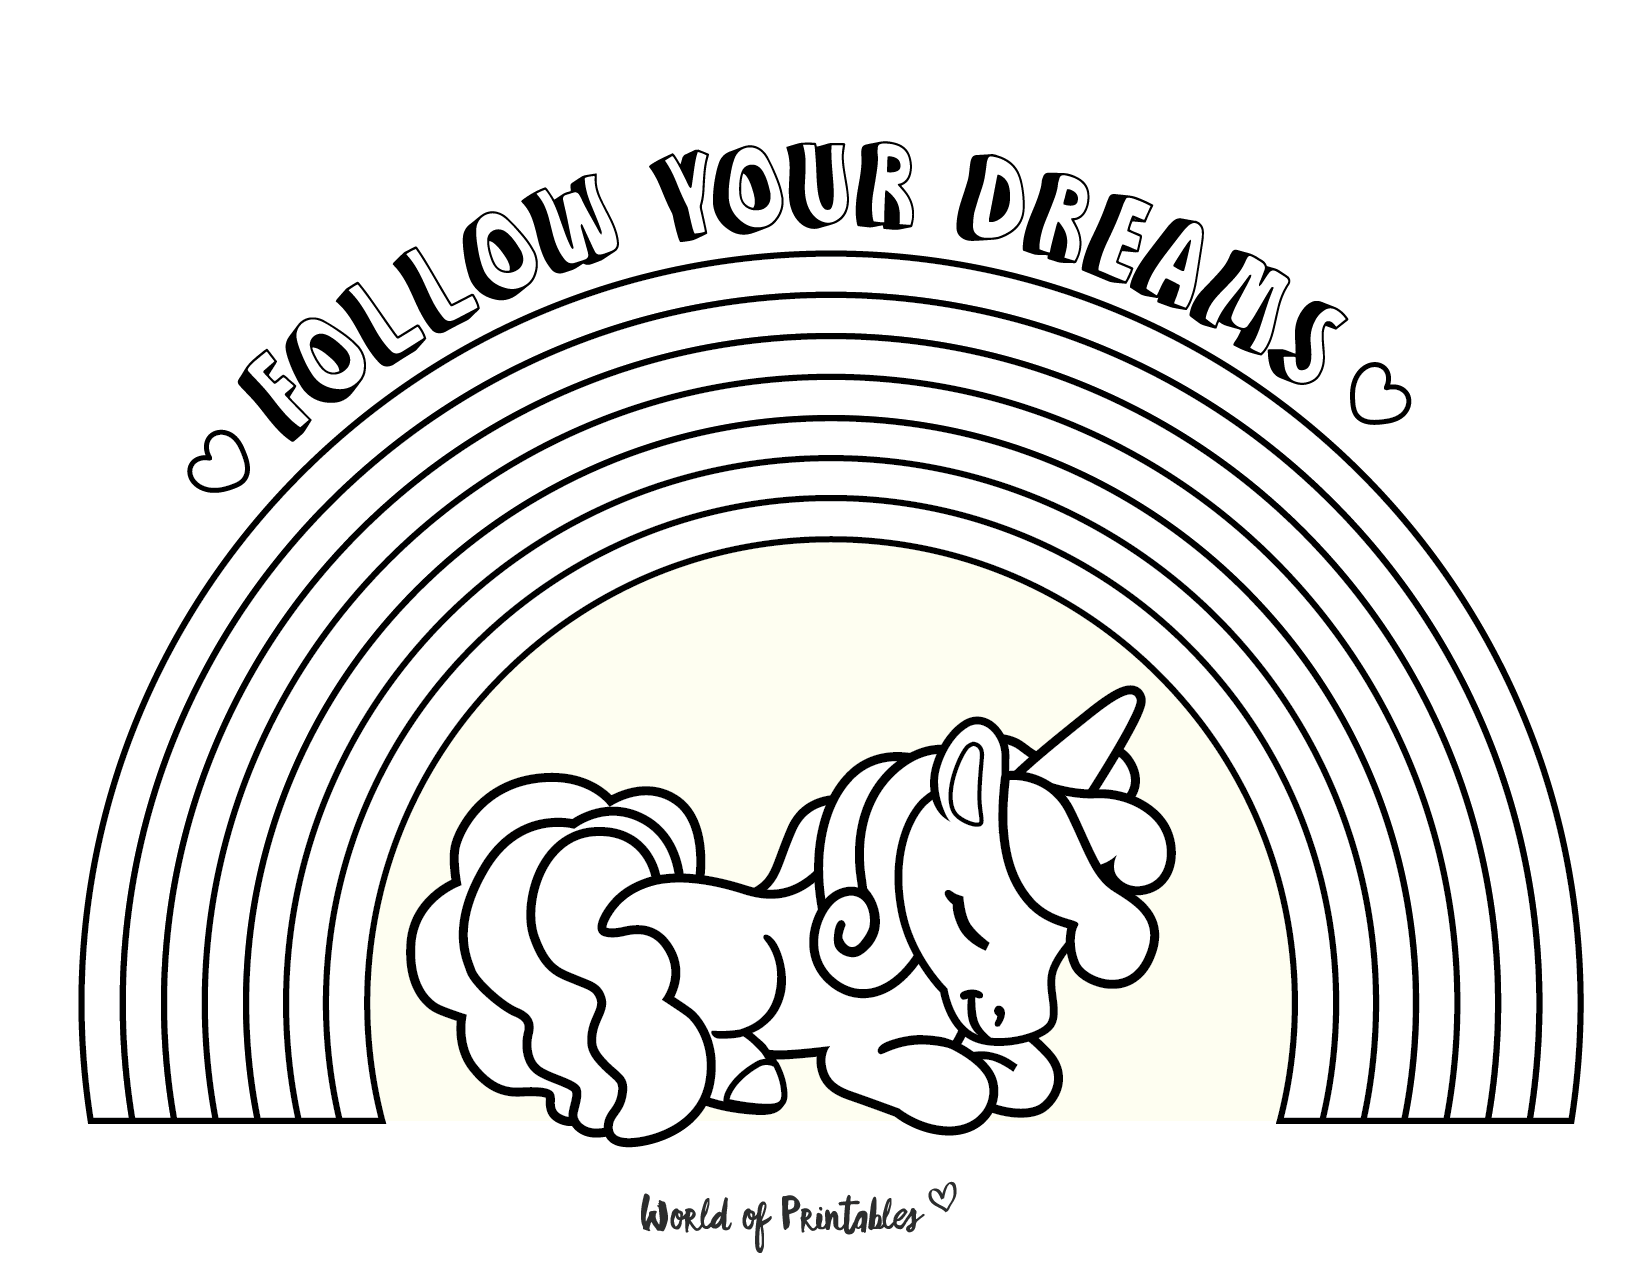 The Best Unicorn Coloring Pages For Kids & Adults - World of Printables